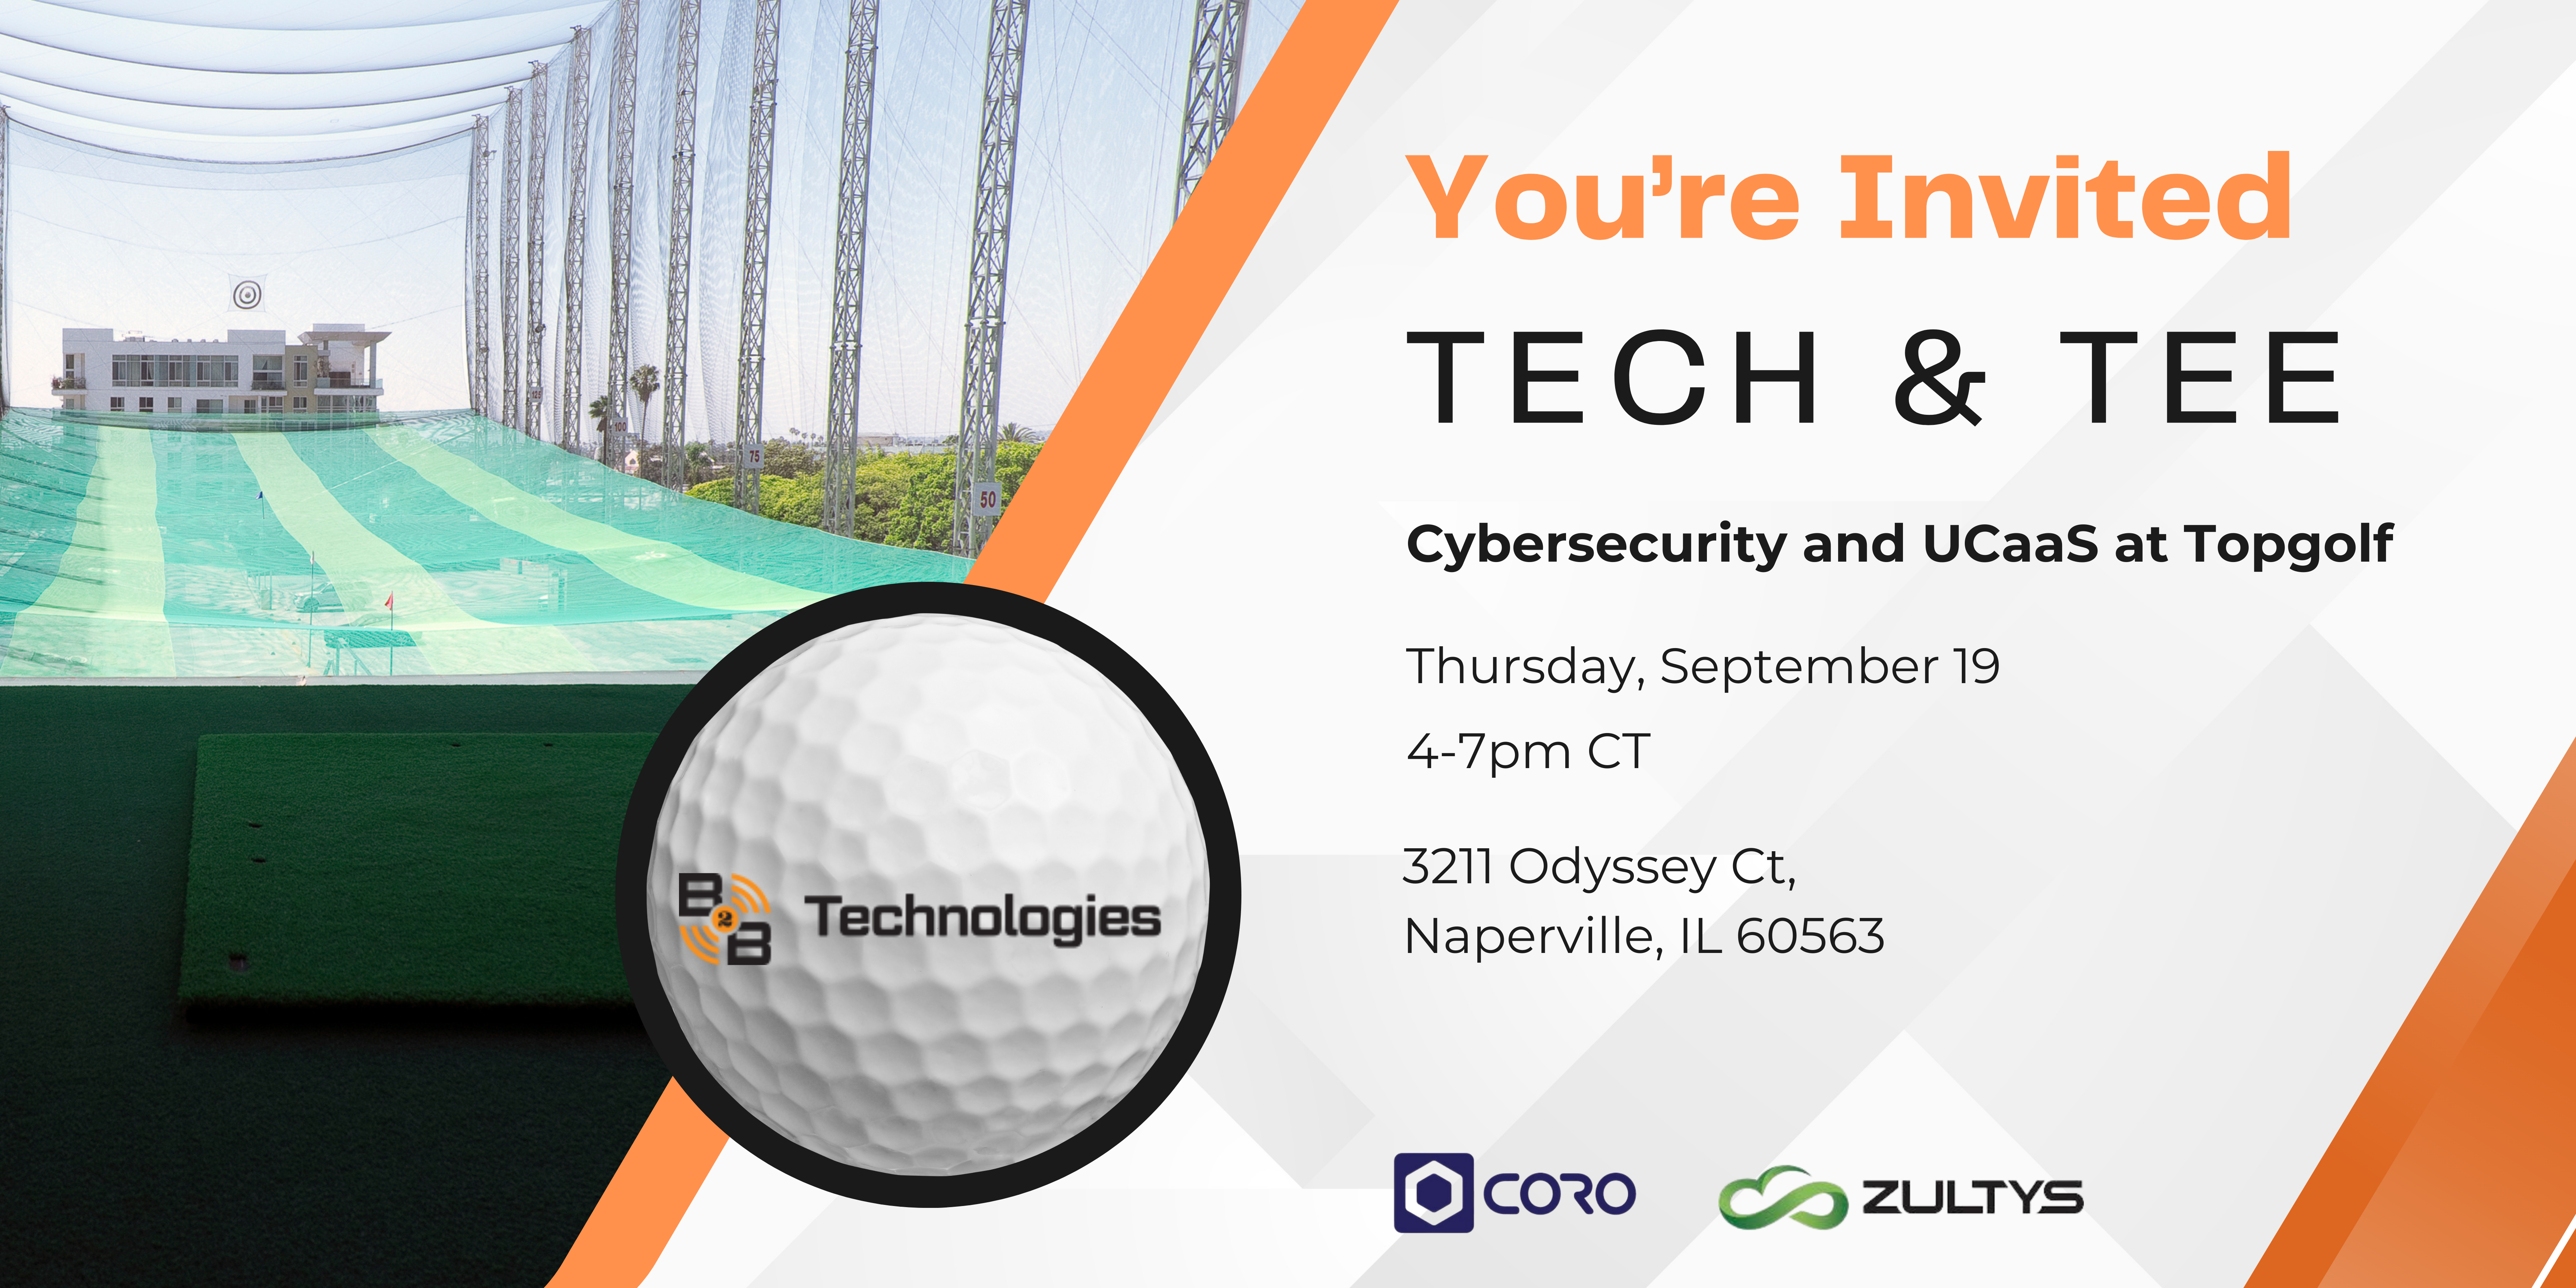  cybersecurity and ucaas at topgolf wednesday june 5 4-7 3211 odyssey ct naperville il, 60564